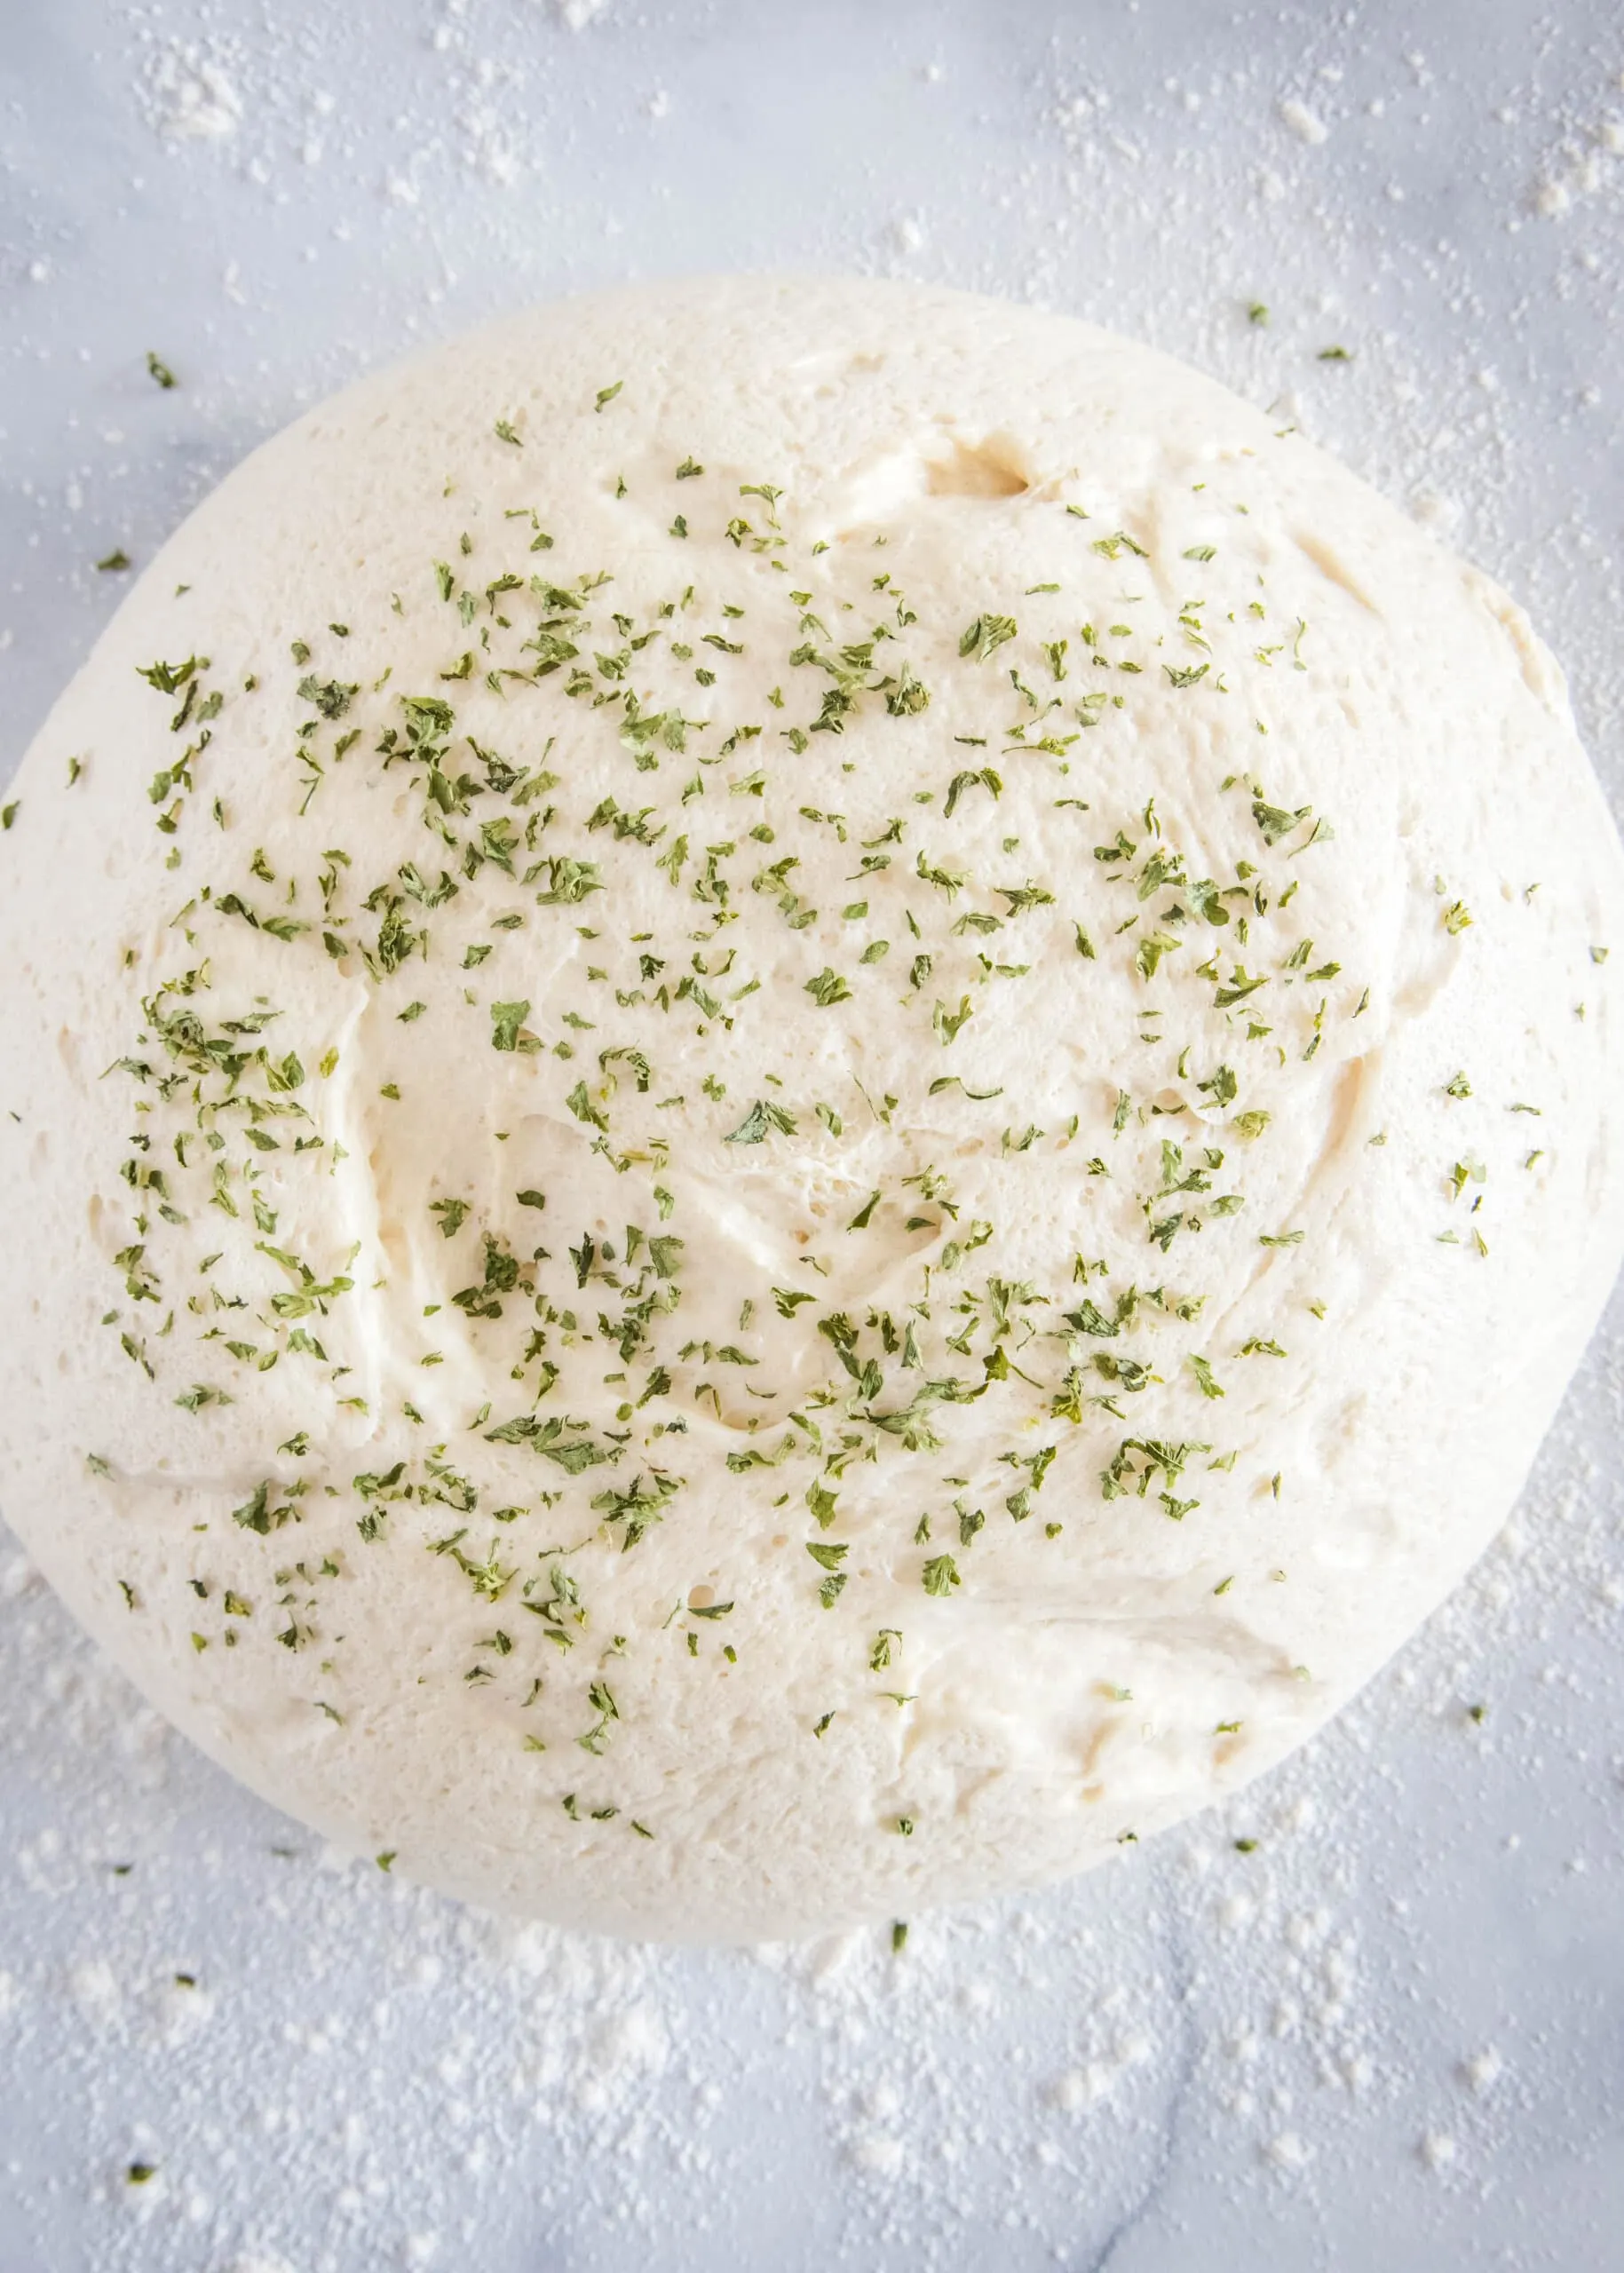 sprinkling chives over bread dough